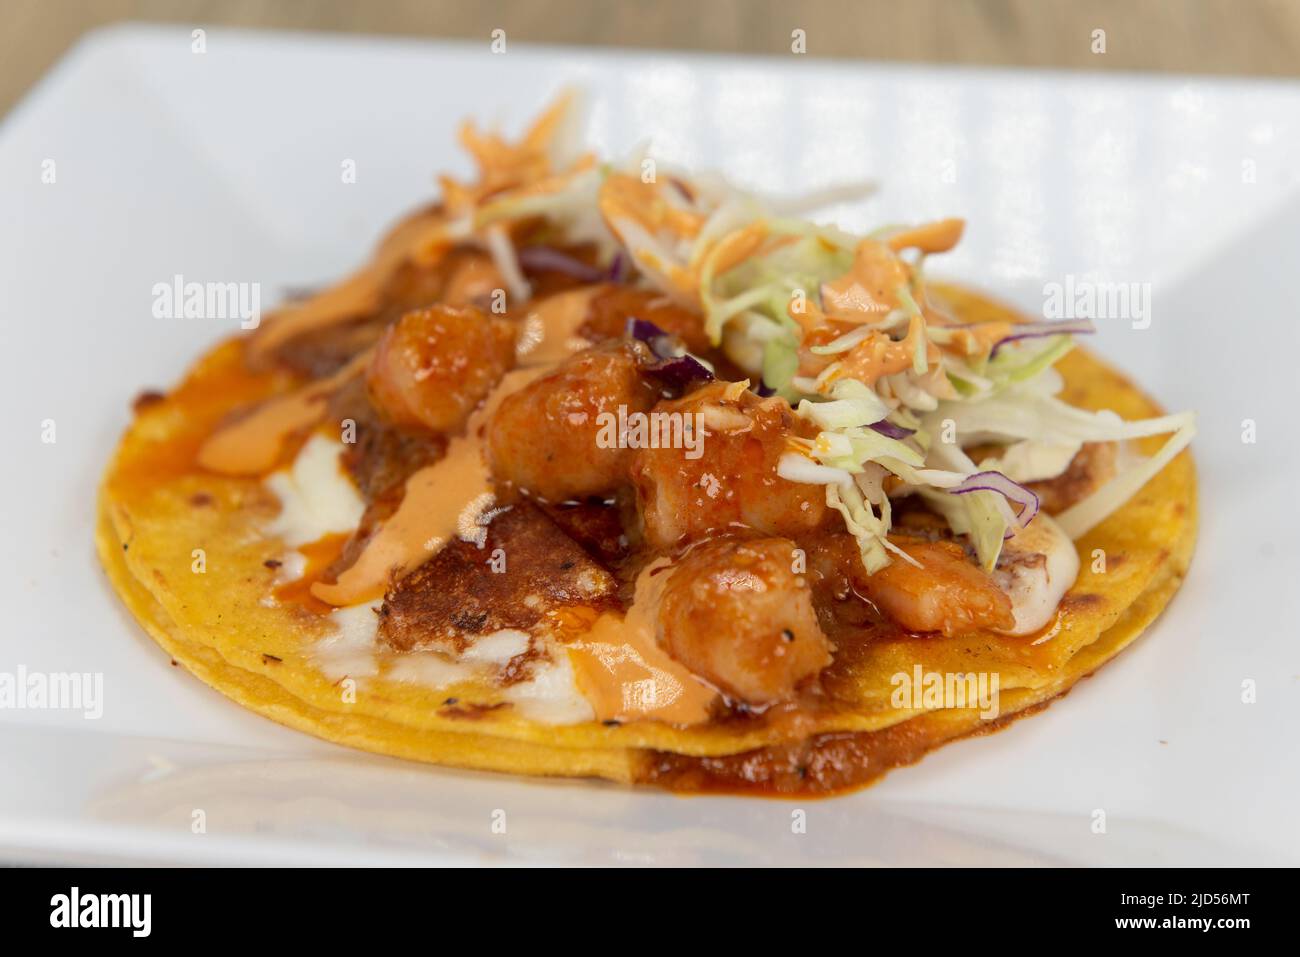 Appetizing shrimp taco with all the great toppings for a tempting Mexican food delicacy. Stock Photo